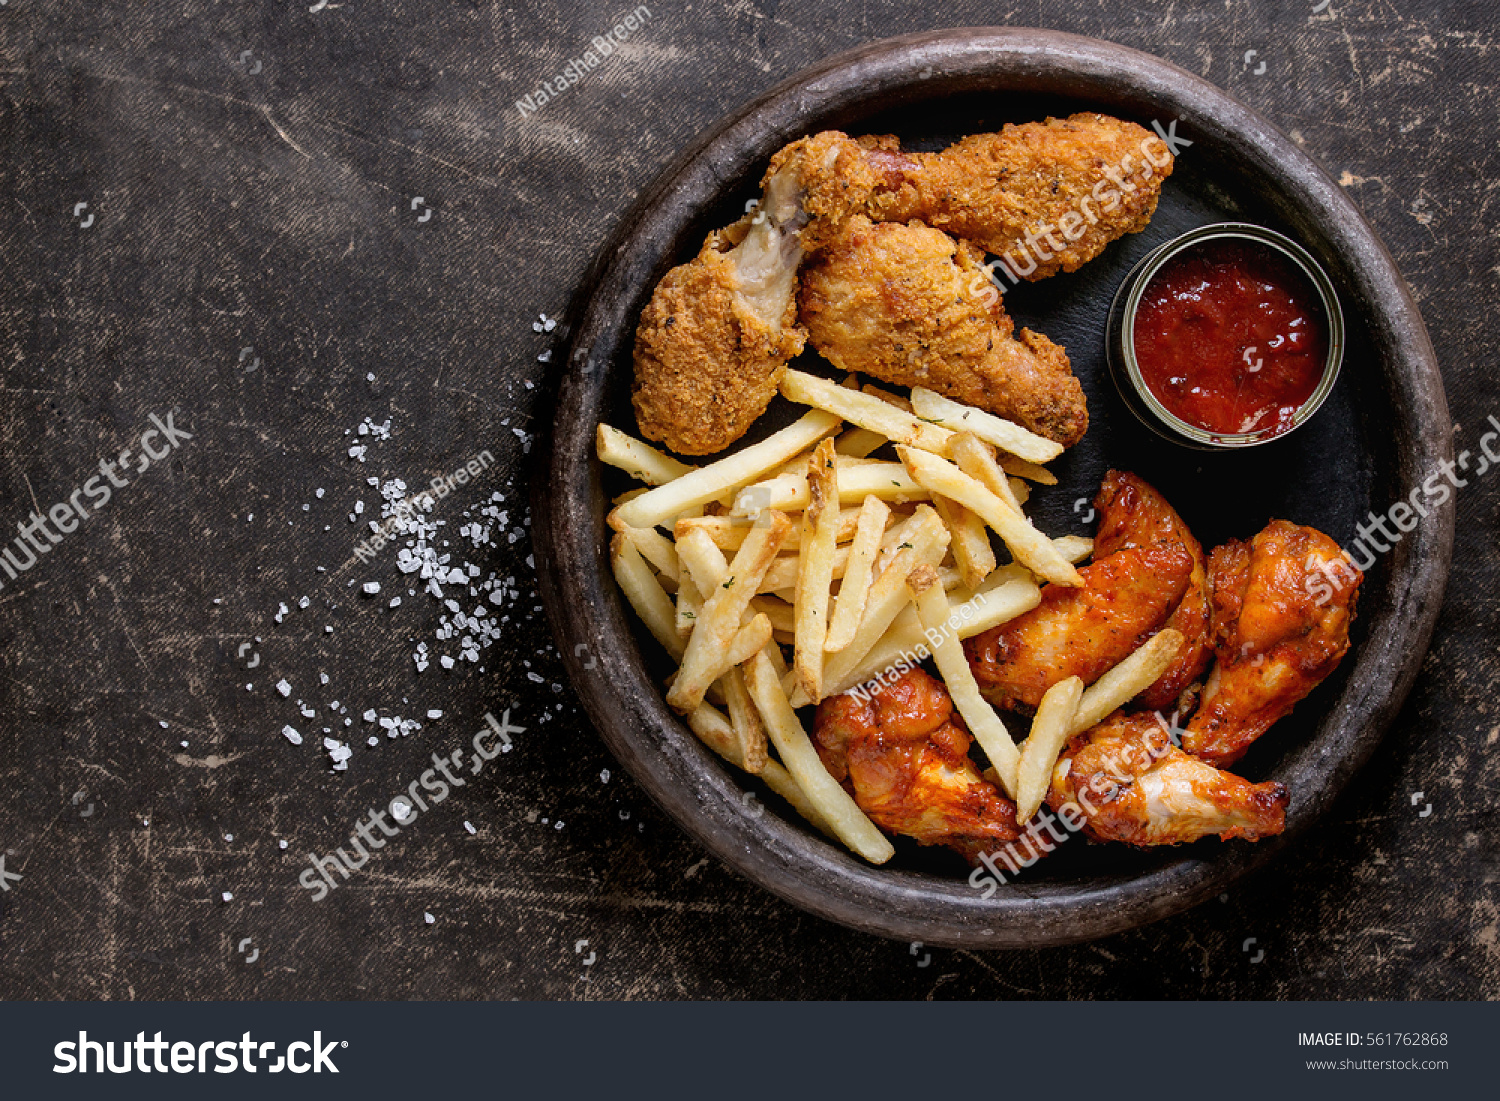 Fast food fried crispy and spicy chicken legs, wings and french fries potatoes with salt and ketchup sauce served in stone plate over dark texture background. Top view, space for text #561762868